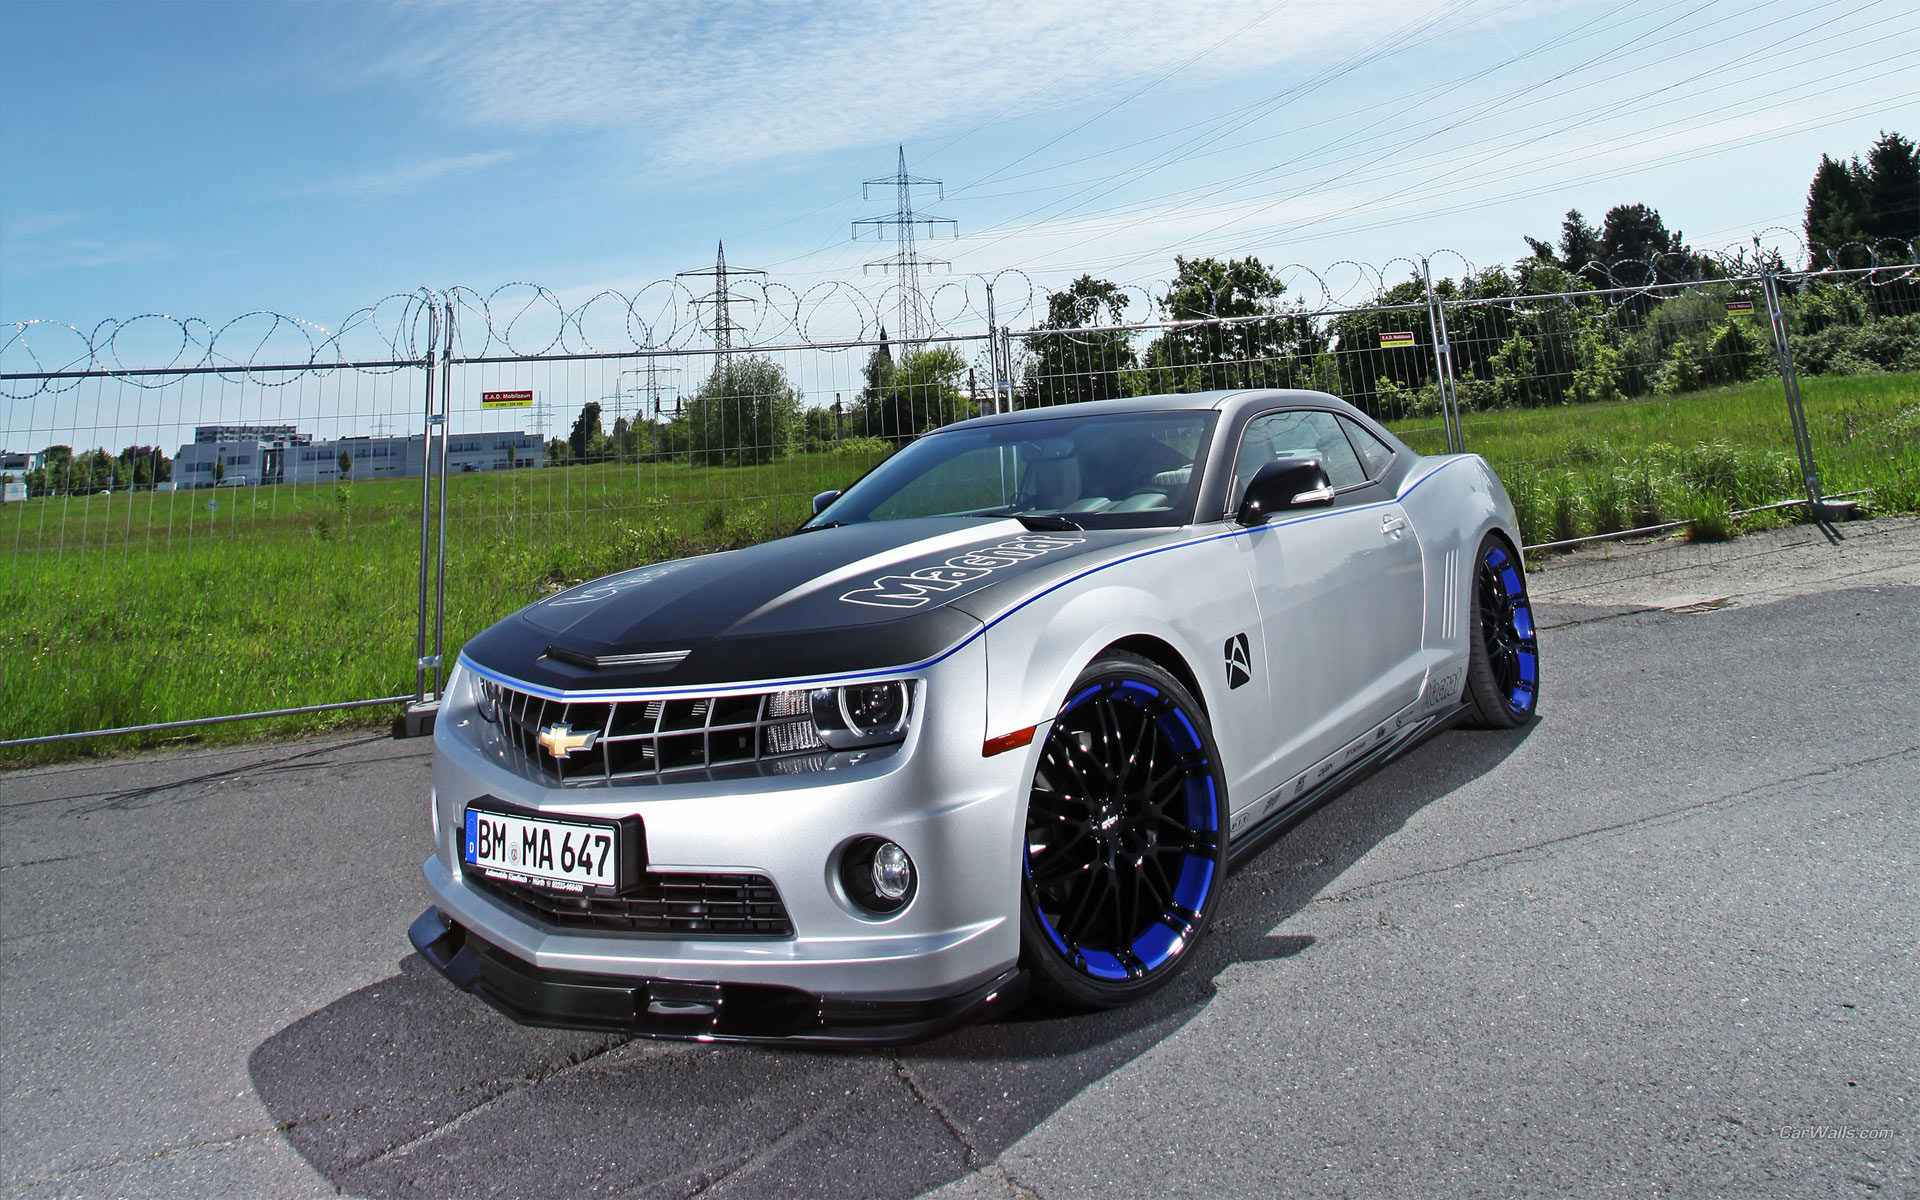 chevrolet, Camaro, 2012, Chevy, Muscle, Cars, Tuning, Roads Wallpaper